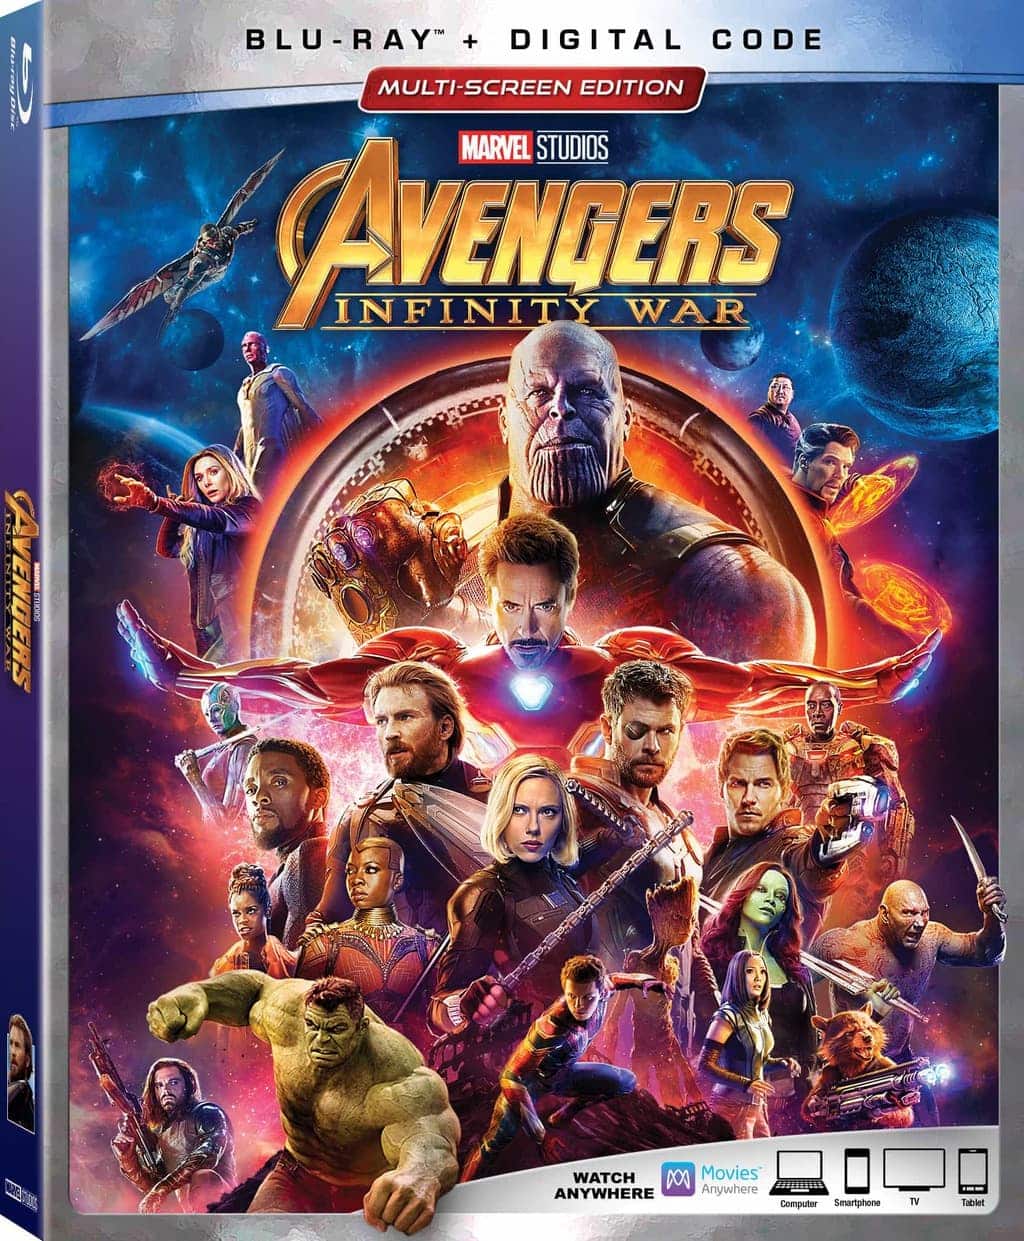 Avengers Infinity War BluRay and DVD, Avengers: Infinity War Movie Review